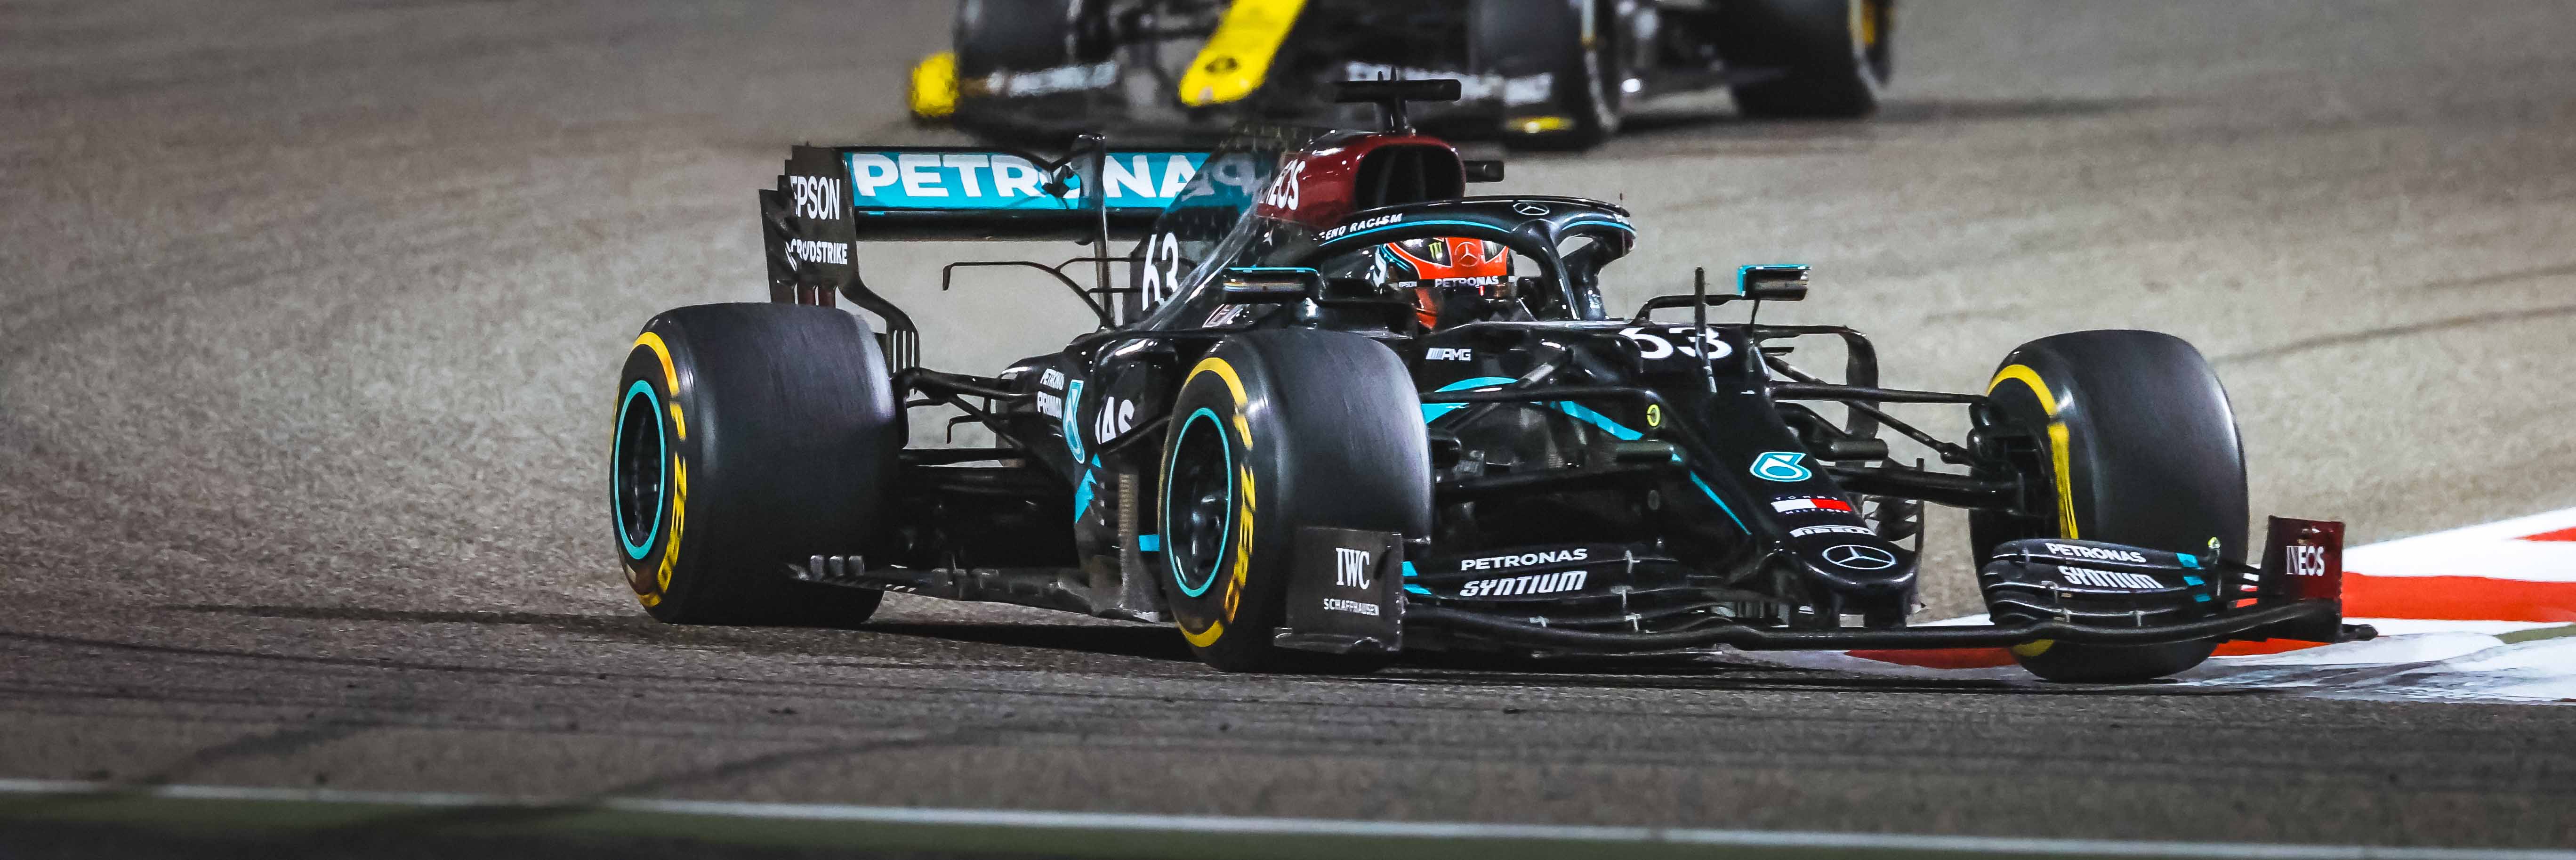 George Russell in the Mercedes F1 car at the 2020 Sakhir Grand Prix